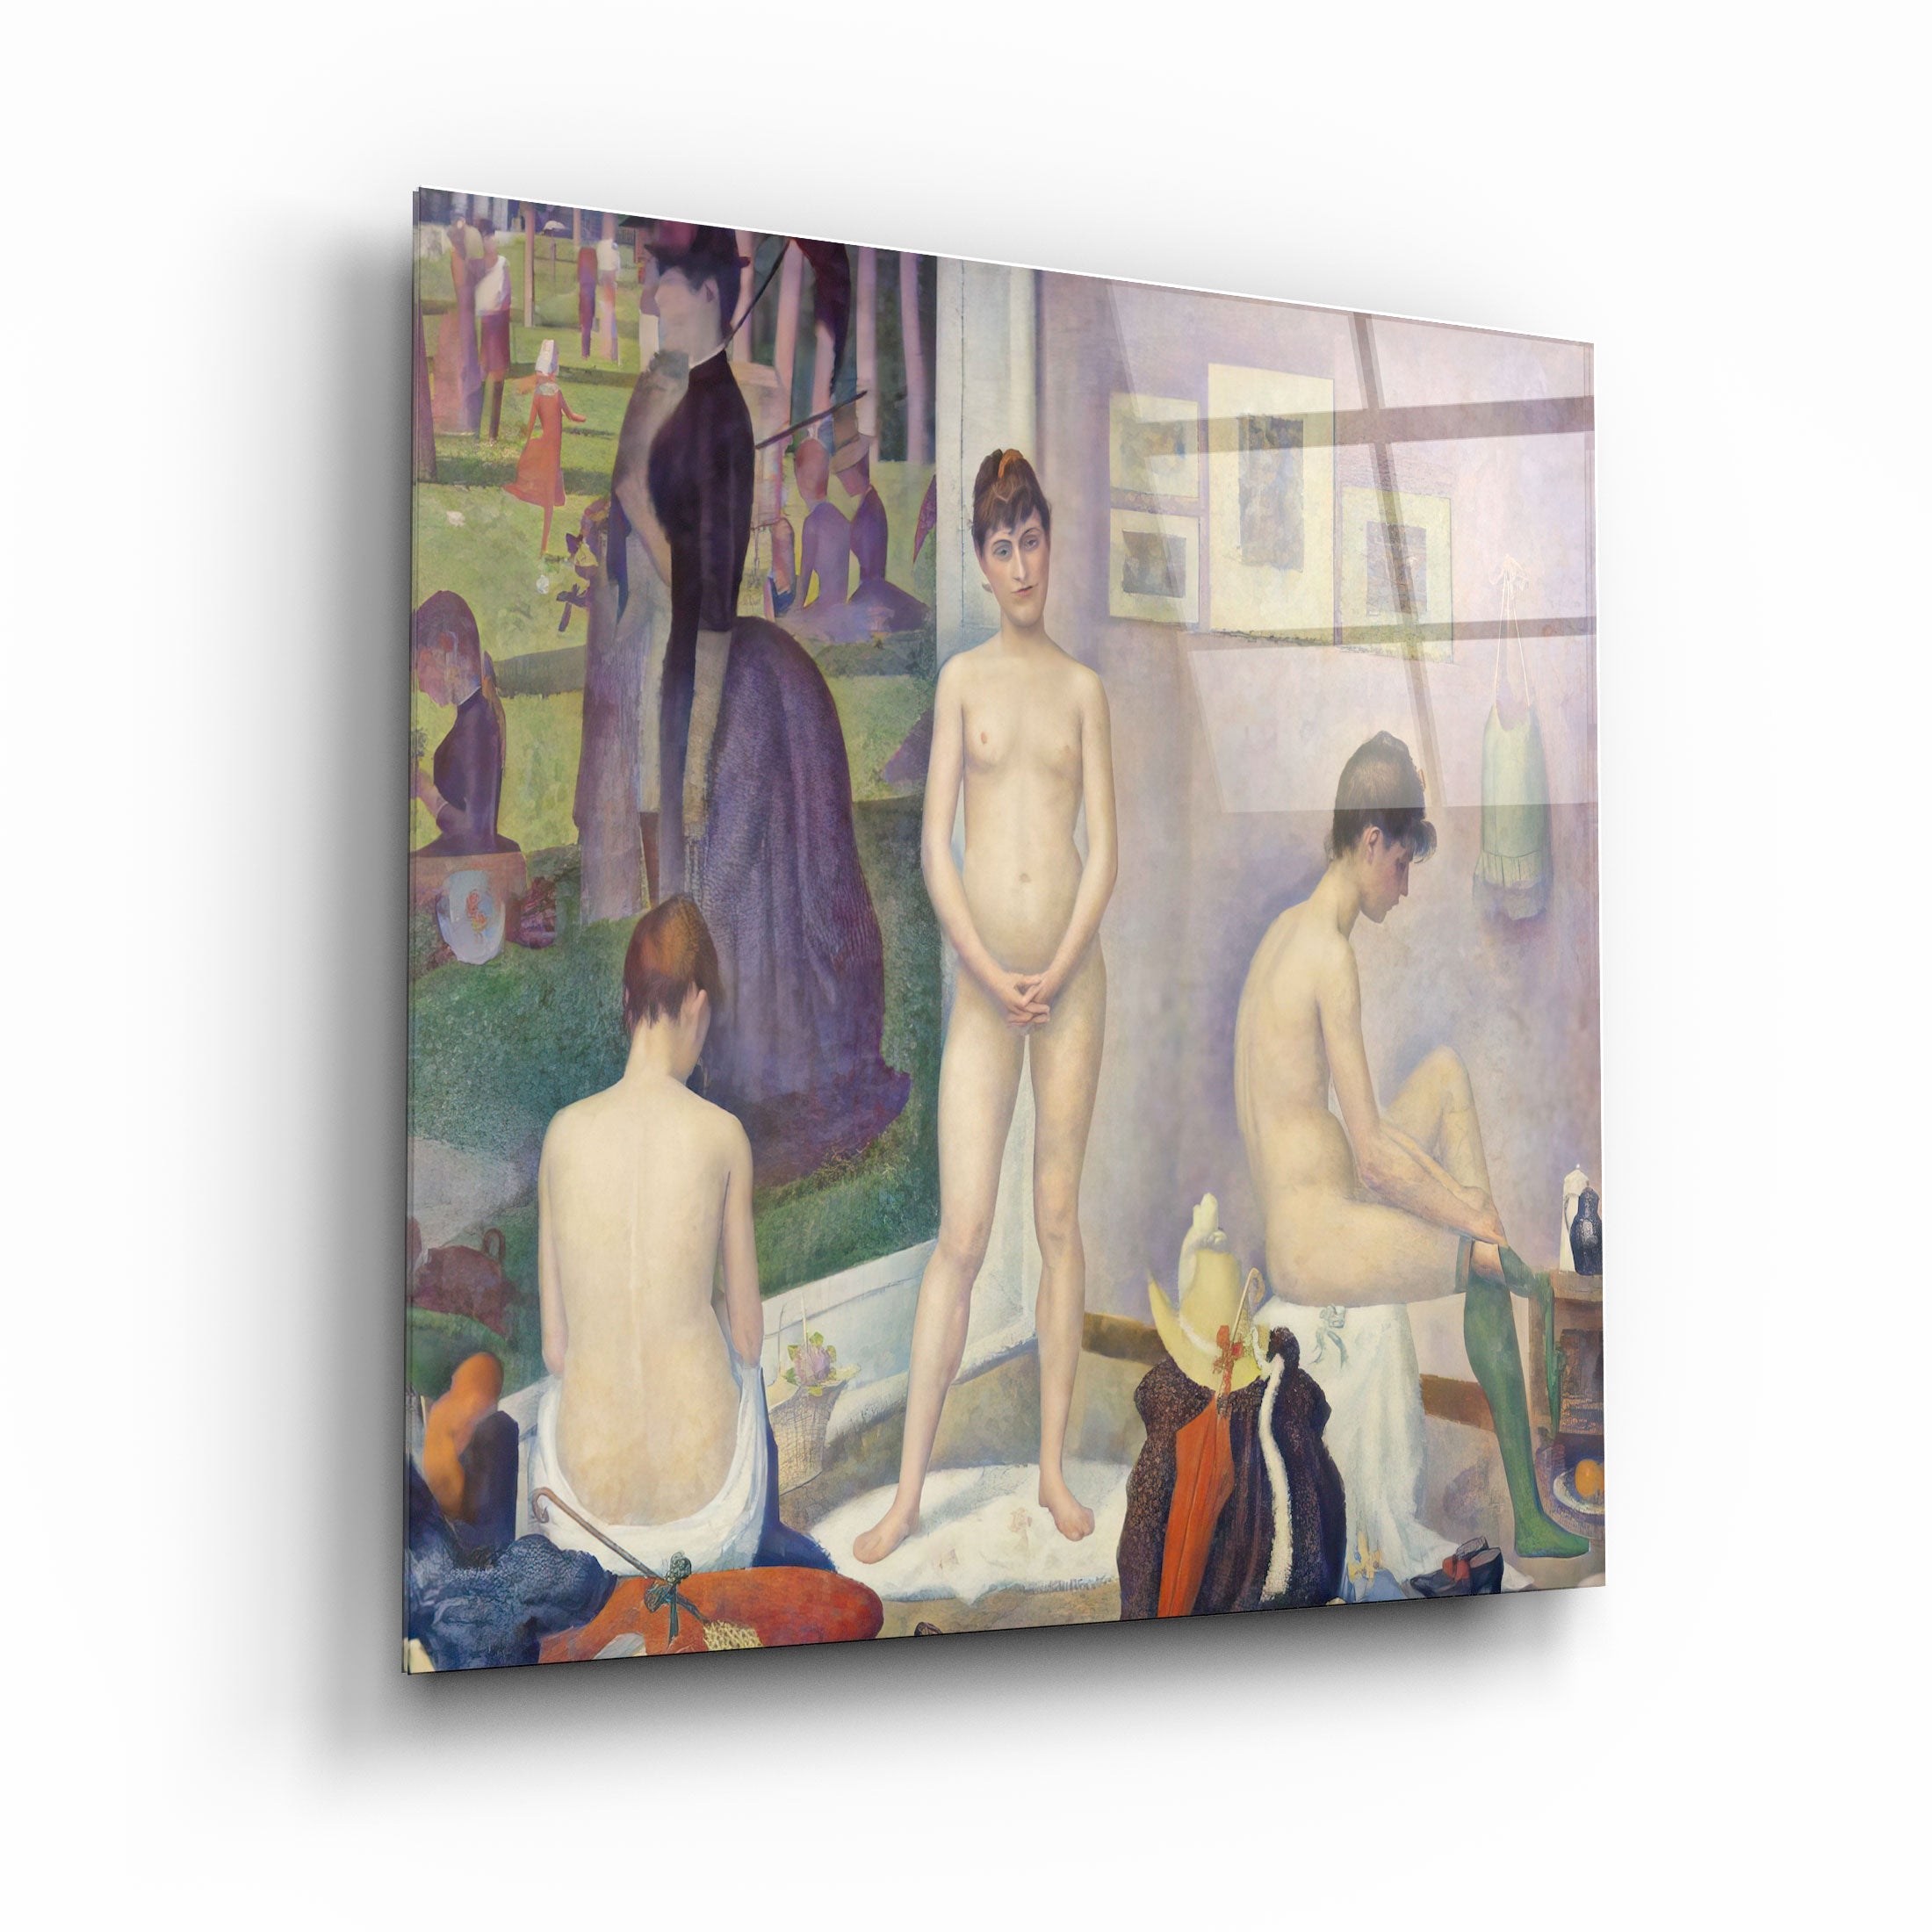 ."Models (Poseuses) (ca. 1886–1888) by Georges Seurat". Glass Wall Art